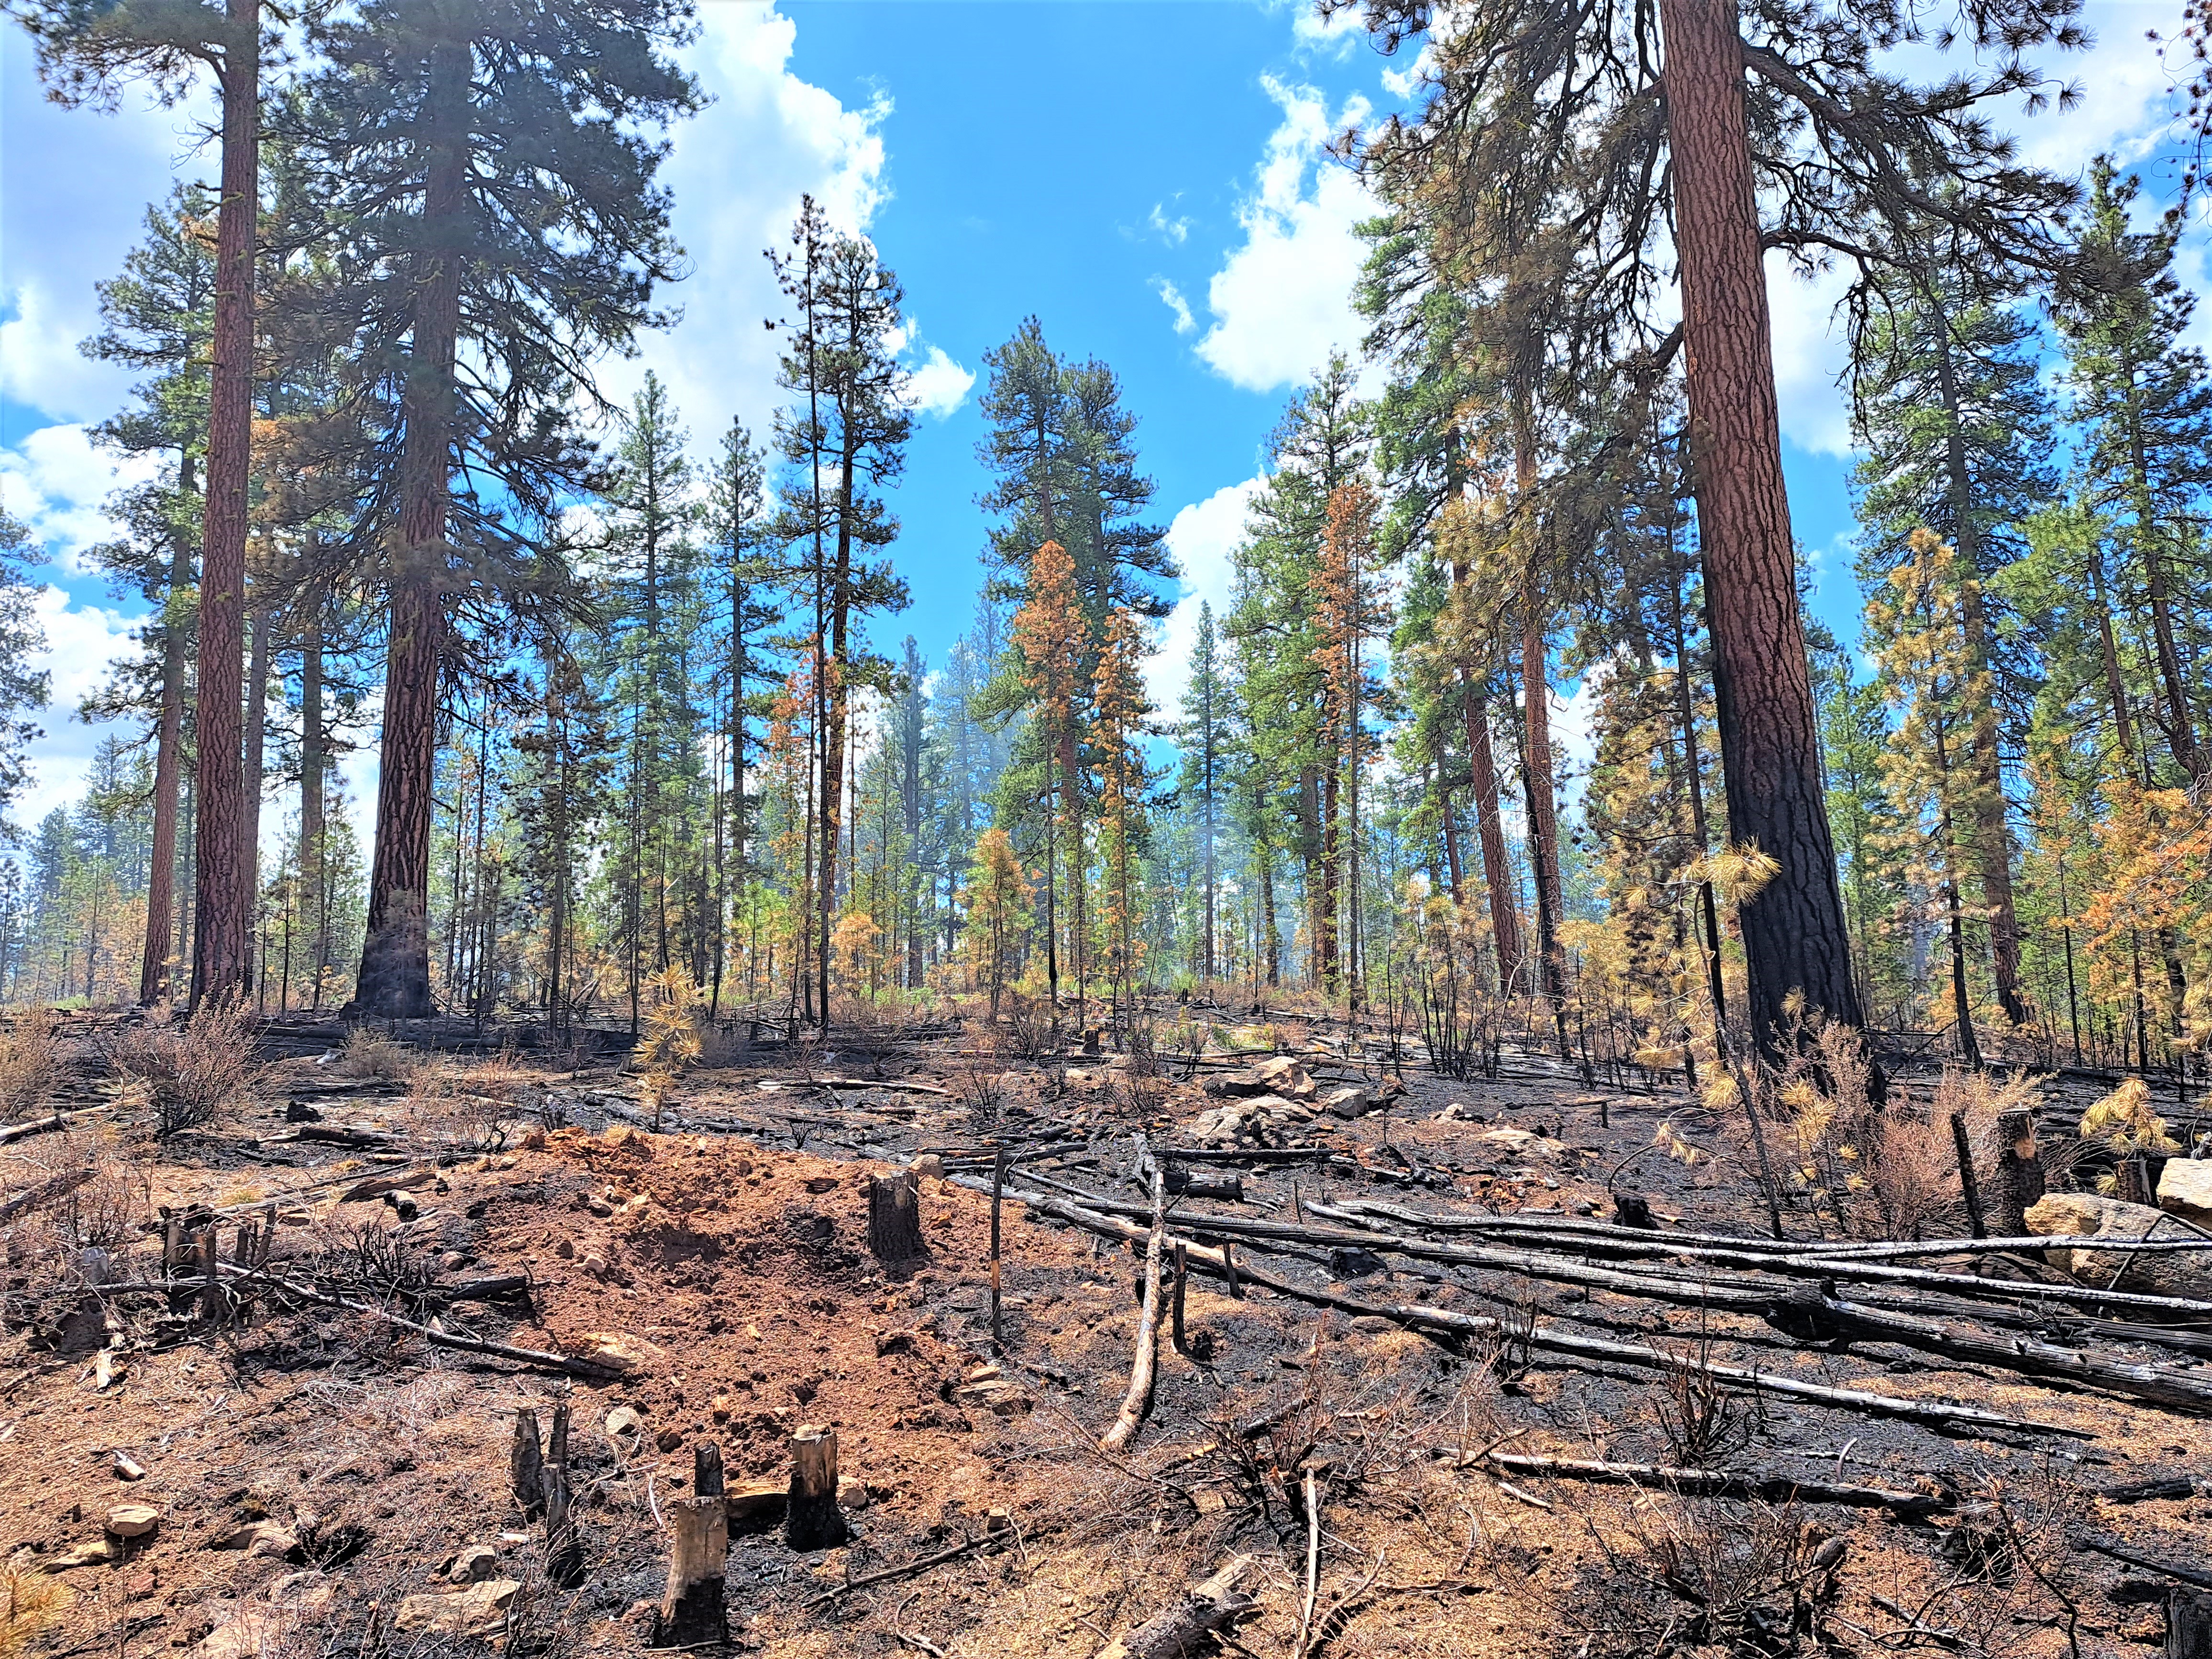 before and after a forest fire